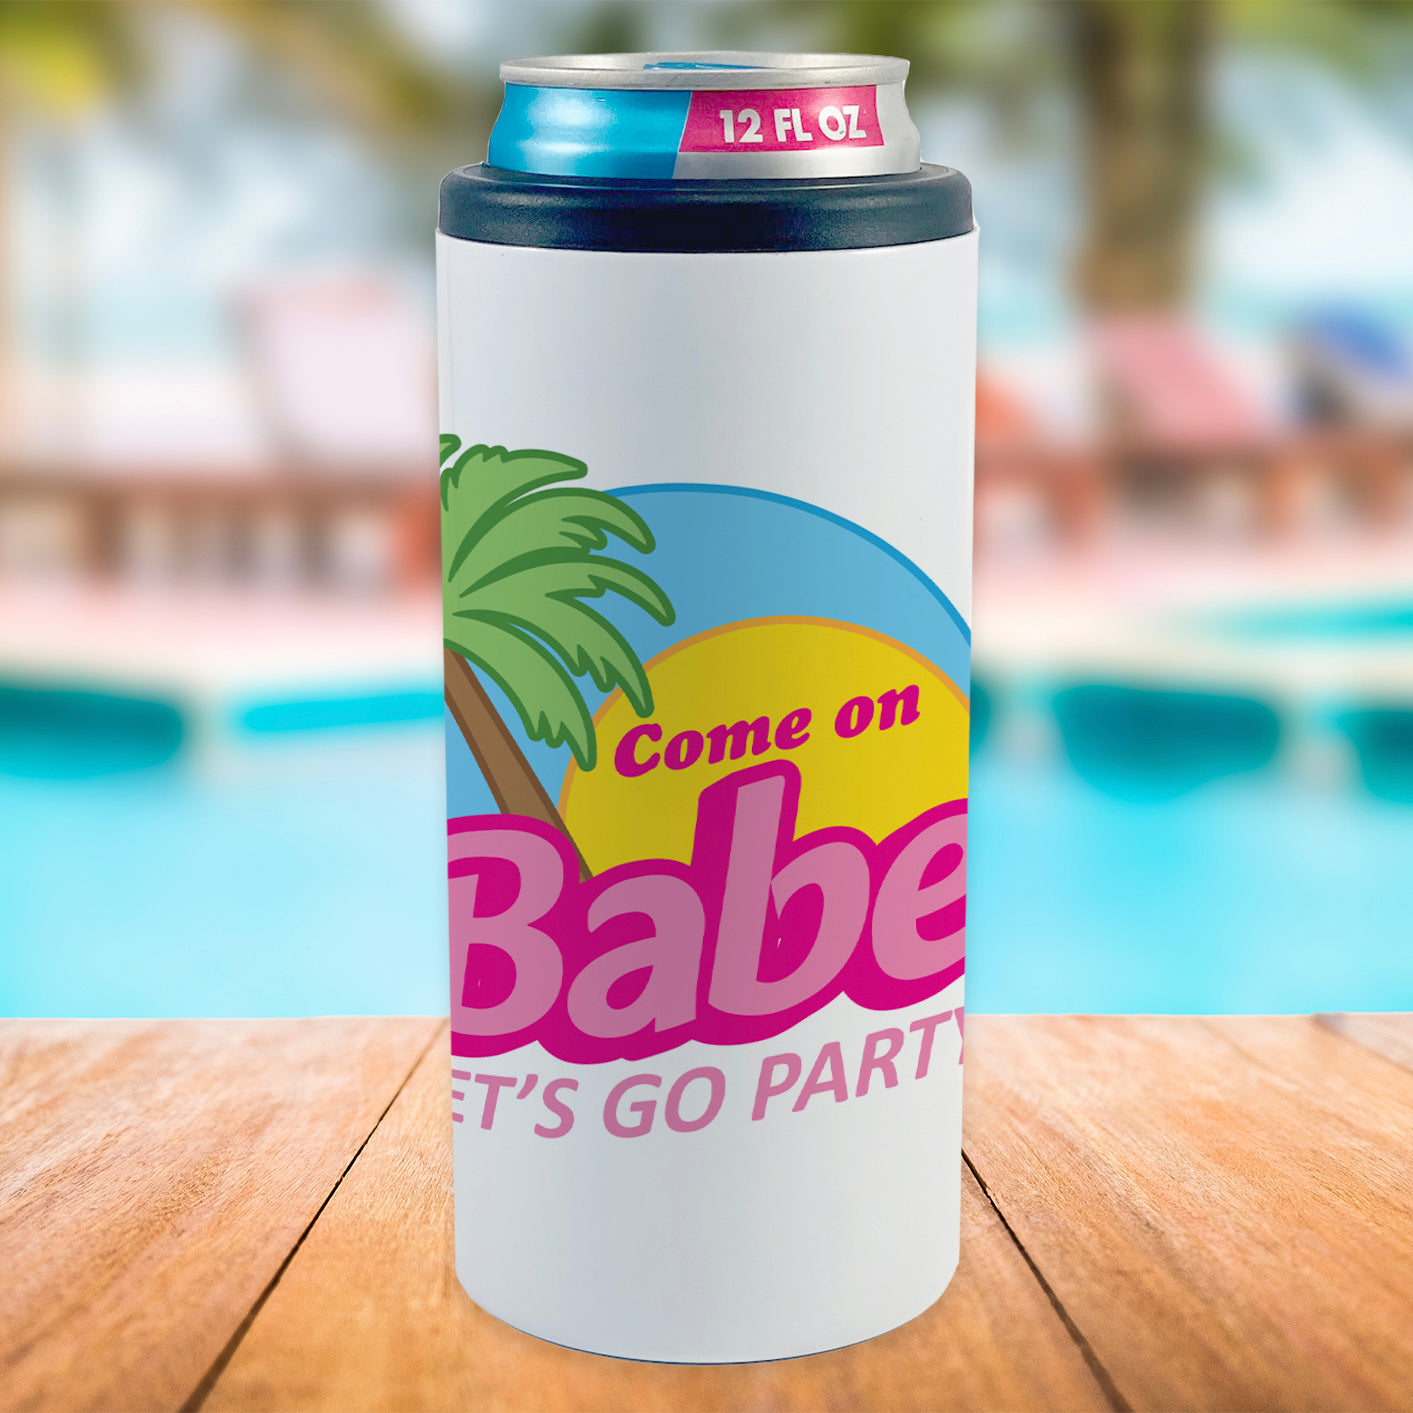 Bridal Collection (Come on Babe Let's Go Party - Personalized) 12oz Slim Can Cooler